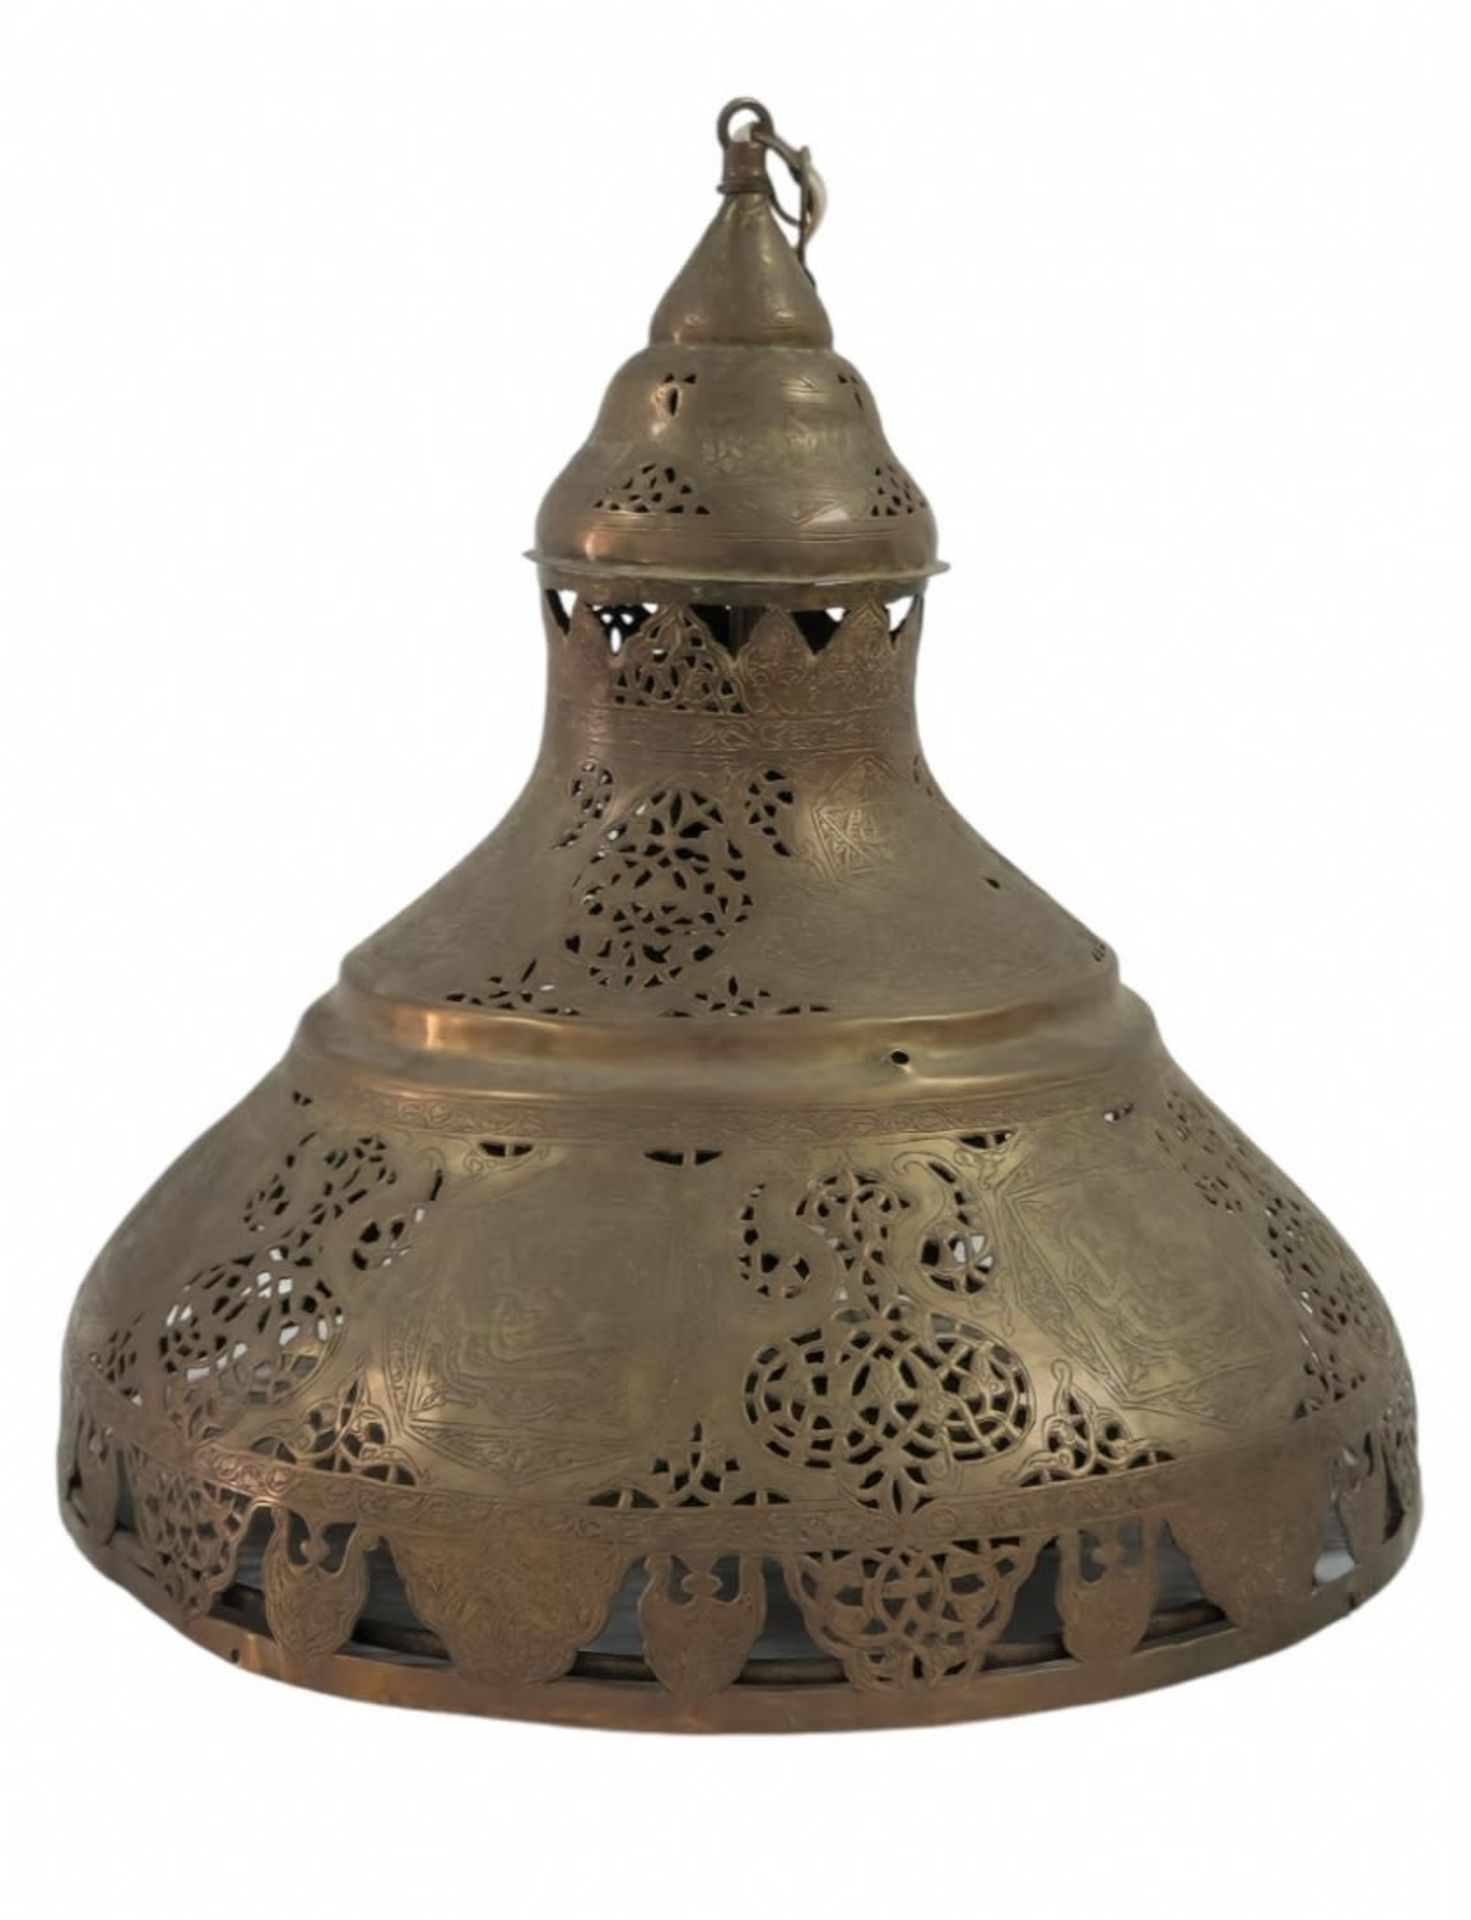 A Syrian ceiling lamp from the 19th century, made of brass, sawn by hand and hammered, Damascus 19th